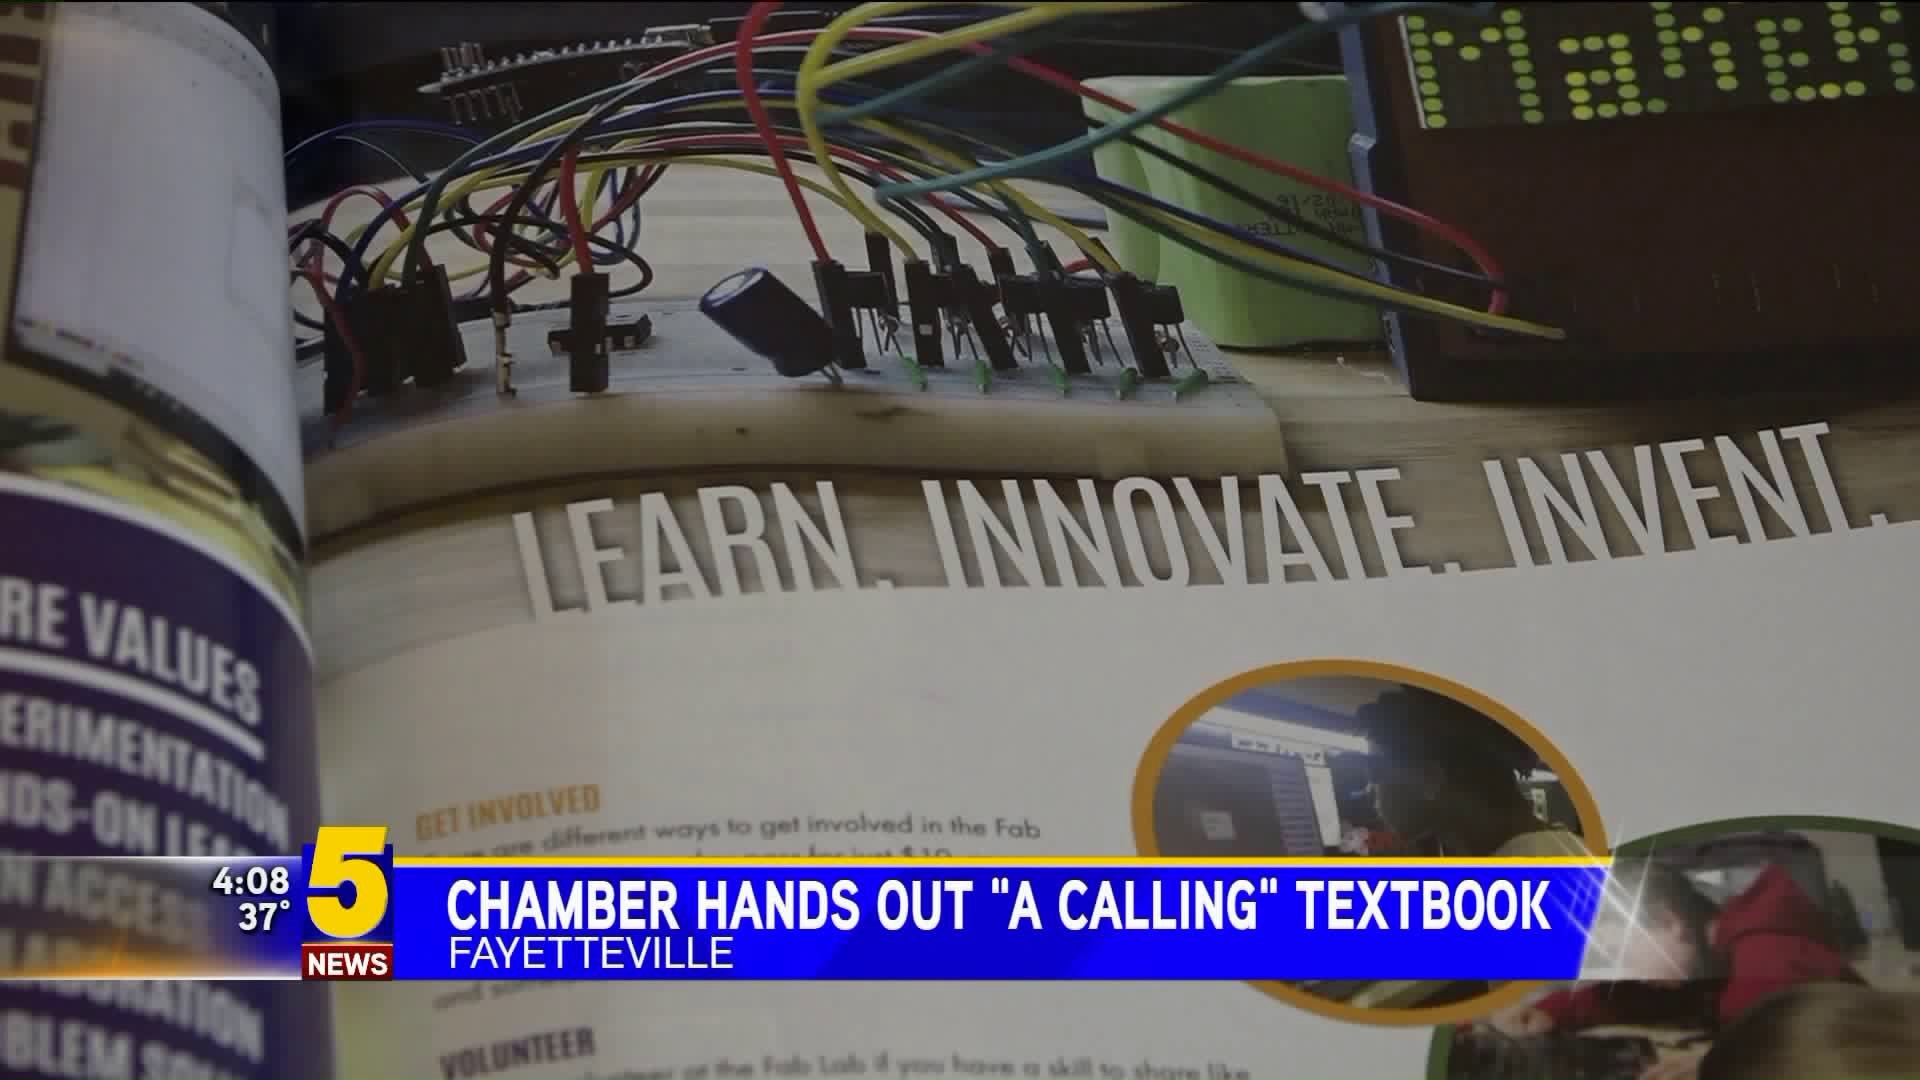 Chamber Hands out "a calling" textbook